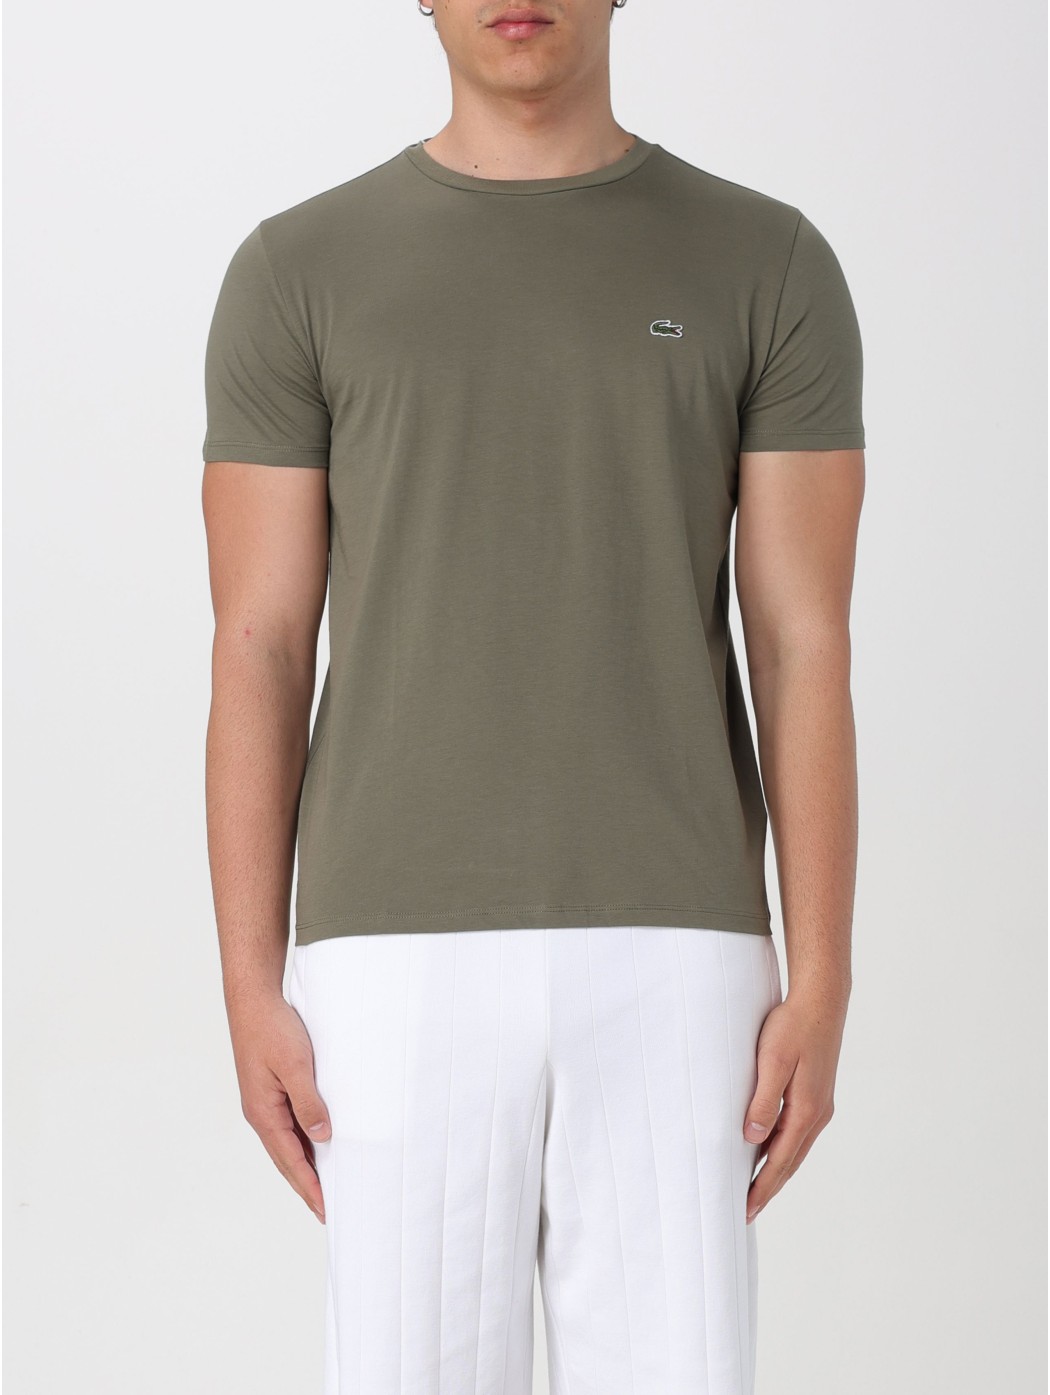 TEE LACOSTE TH6709 316